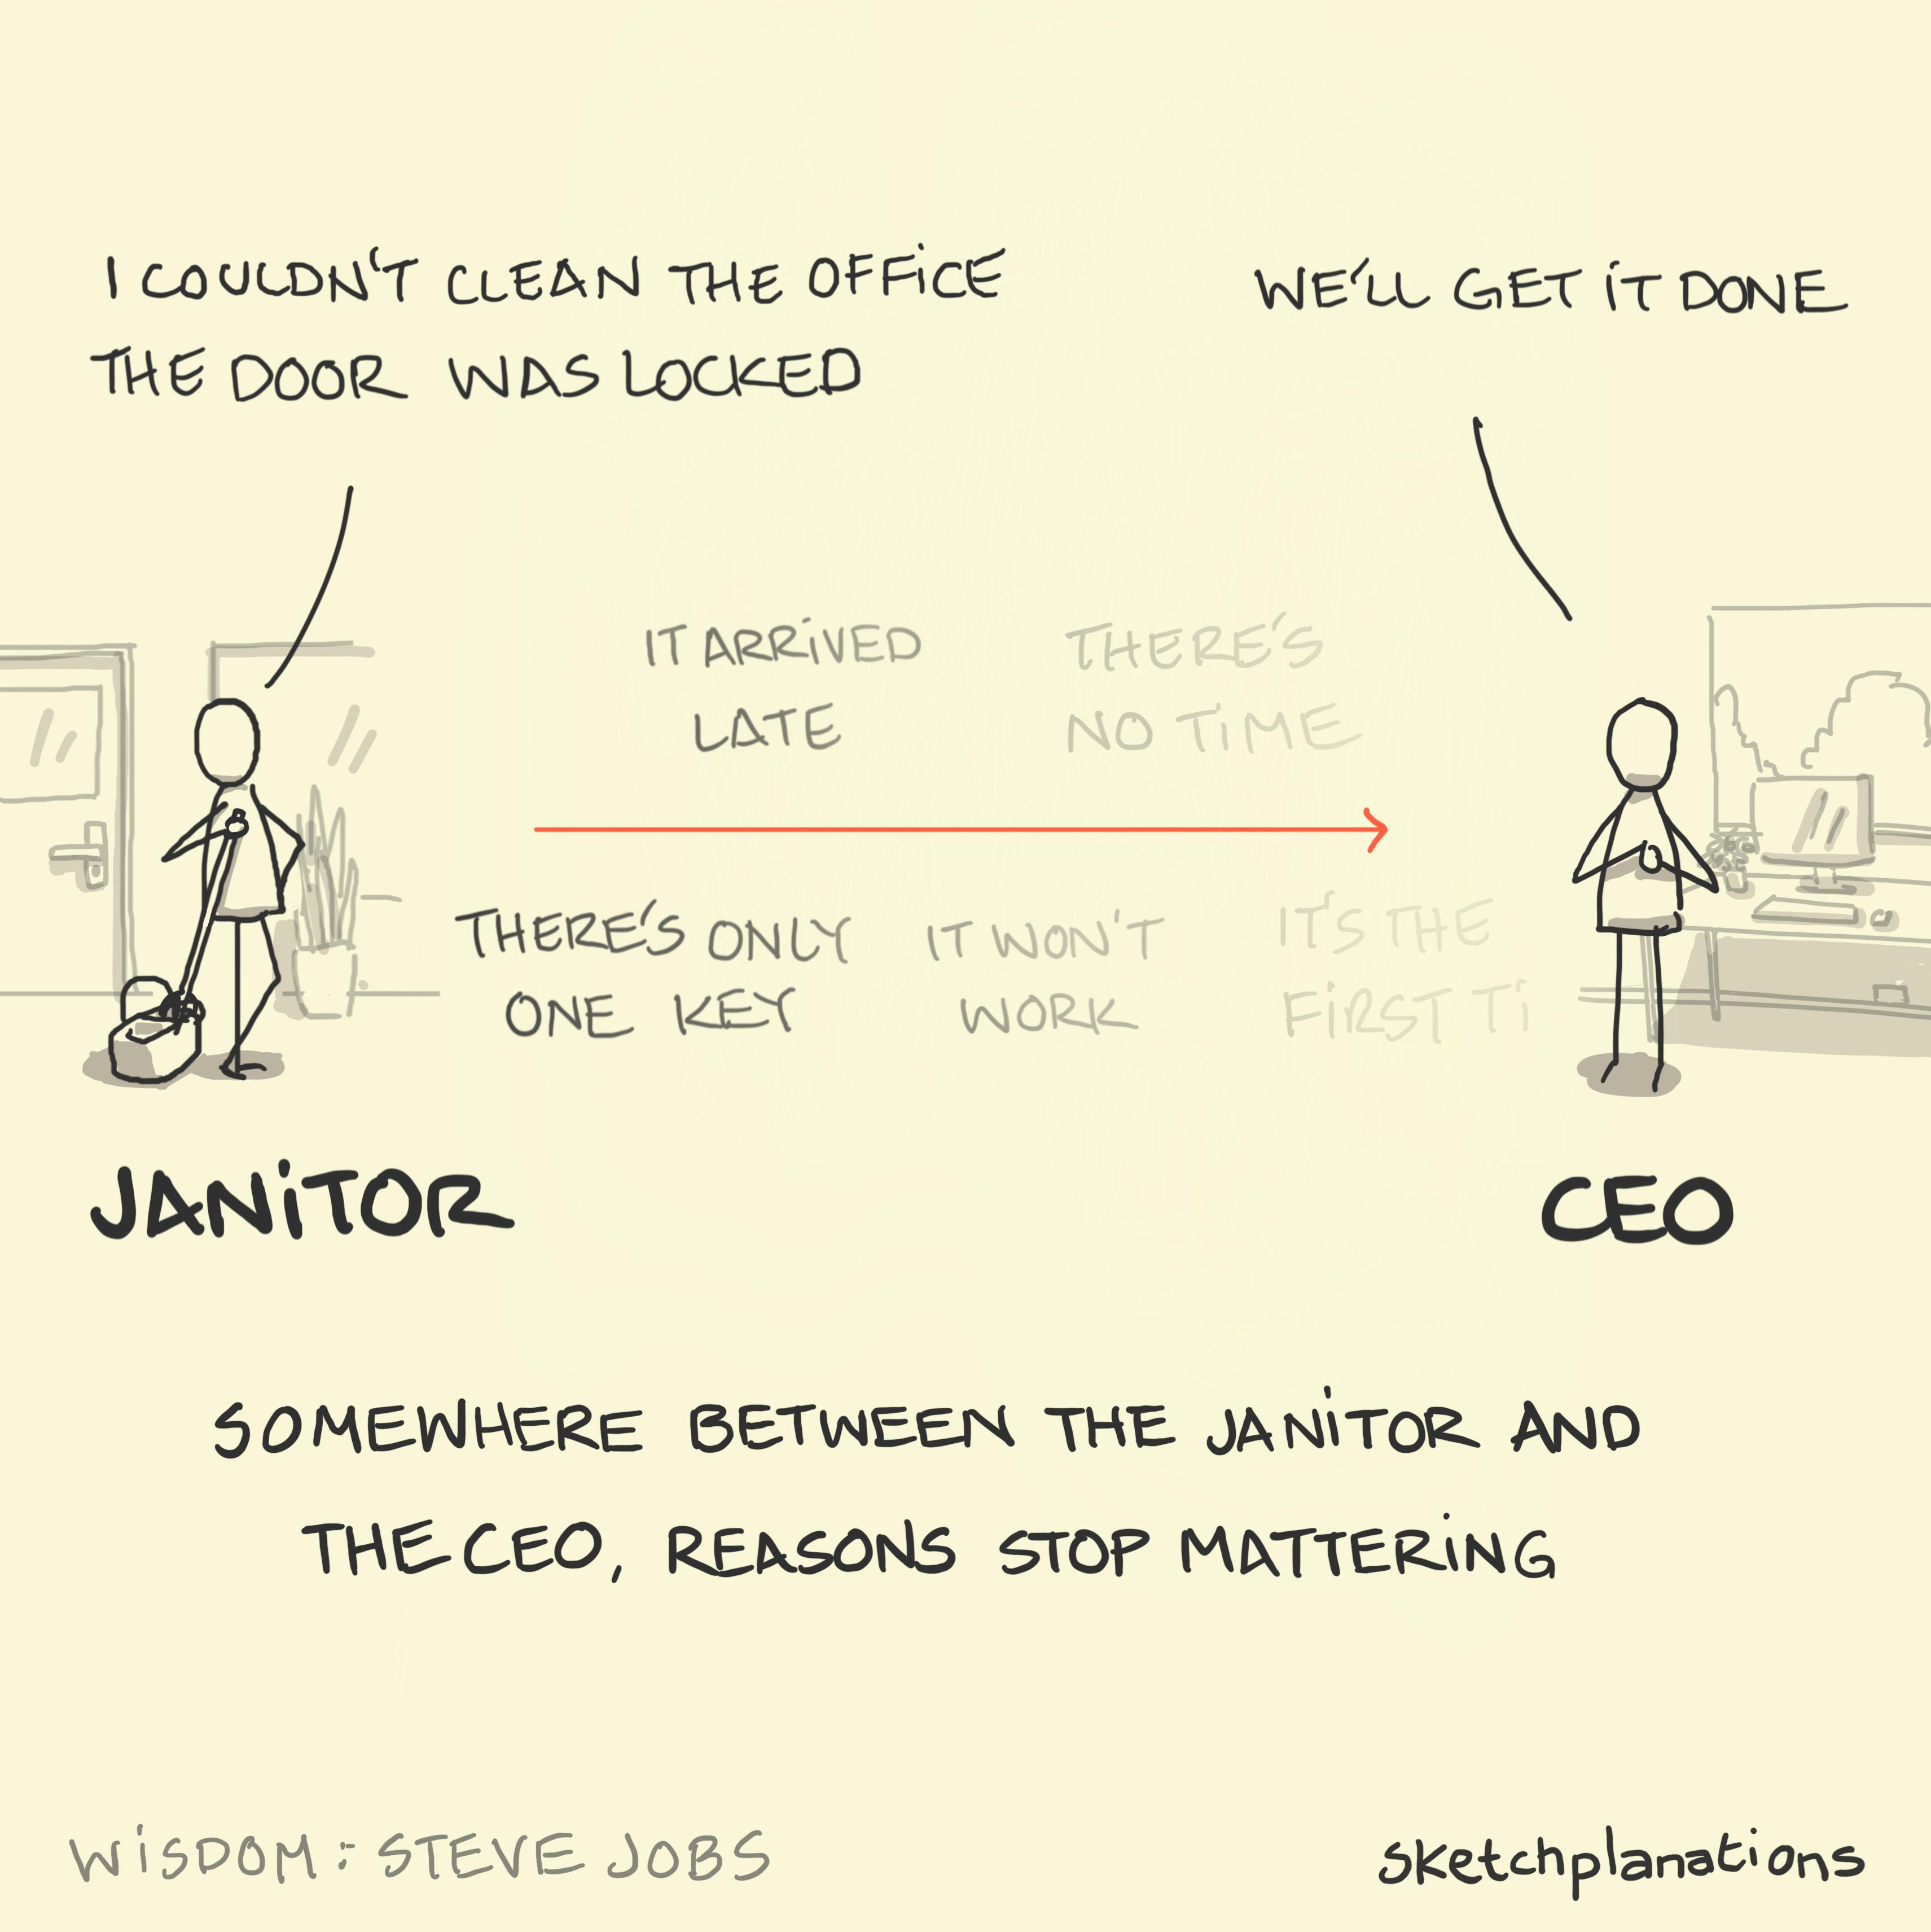 The janitor and the CEO story inspired by Steve Jobs illustrating how reasons stop mattering somewhere between the janitor and the CEO